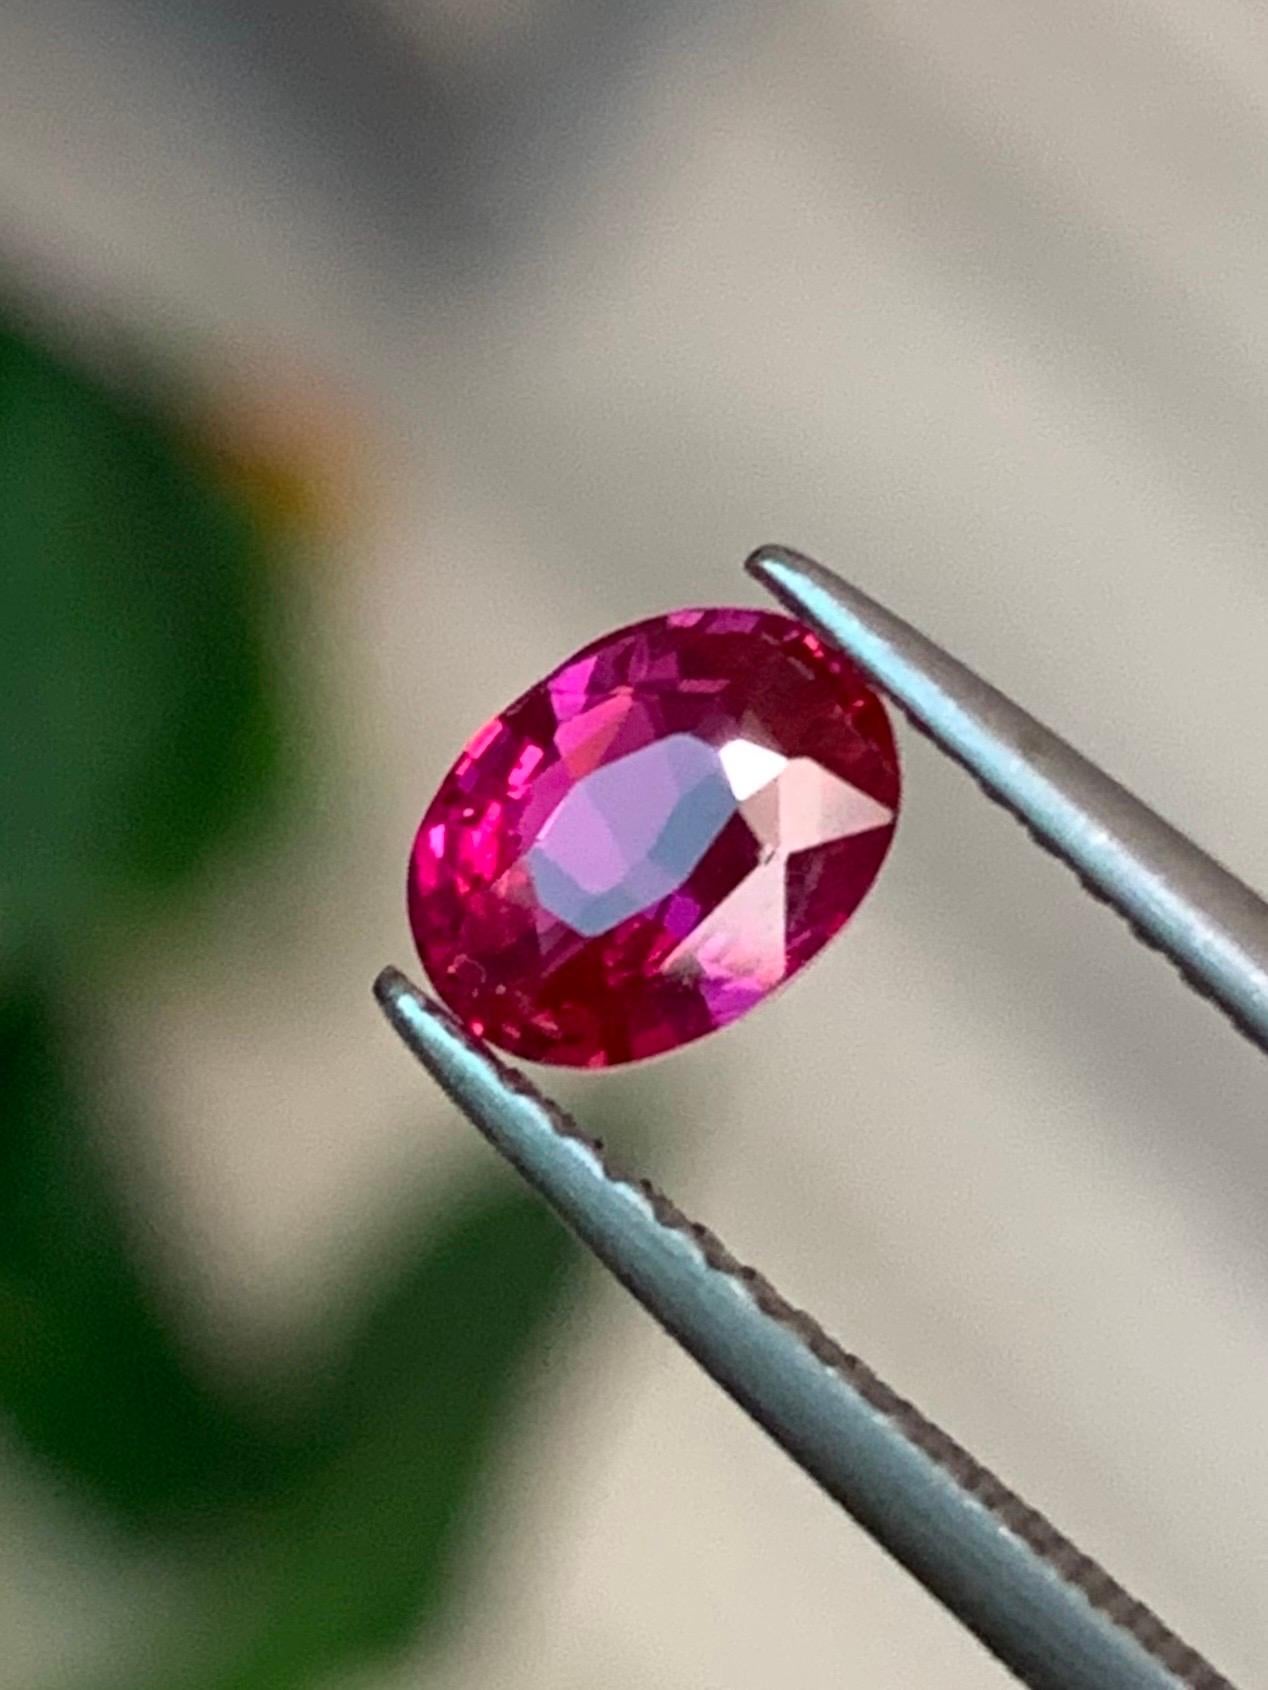 ITEM DESCRIPTION: 
Gem type : Natural Ruby
Origin: Mozambique 
Treatment: No Treatment
Color: Red
shape: Oval
Size:  1.01 Carats

Mozambique unheated rubies that are GRS (GemResearch Swisslab) certified are highly esteemed in the gemstone market for